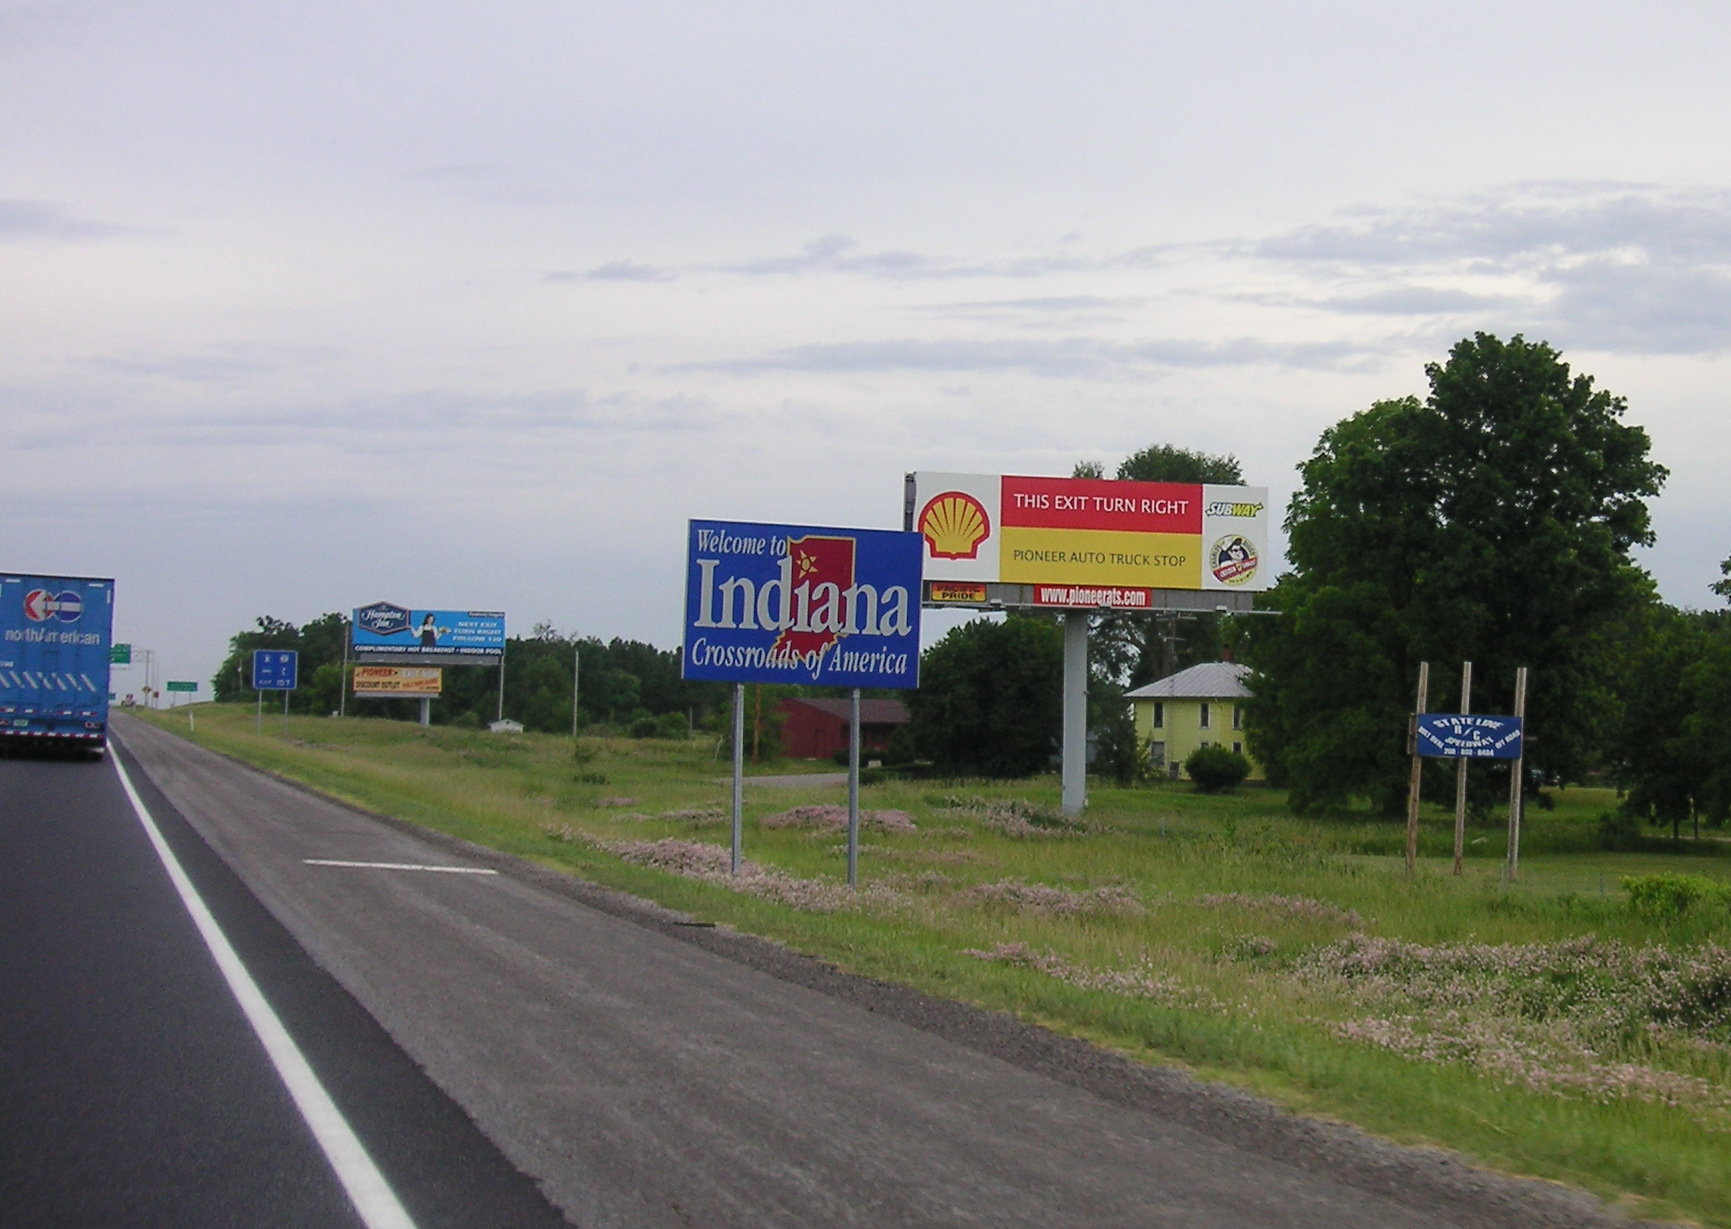 there are many different types of signs along this highway